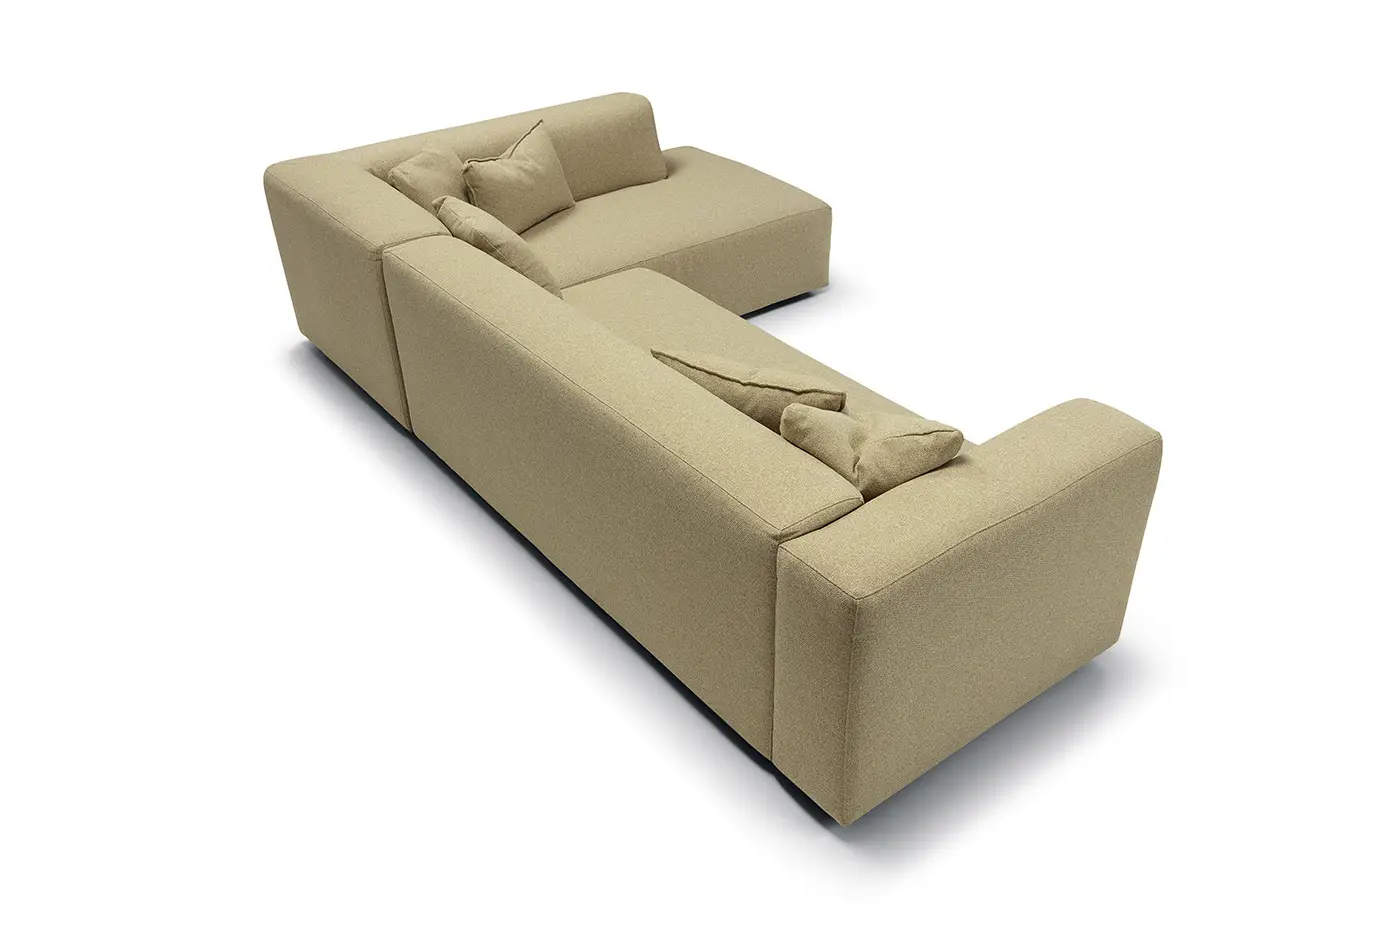 Milano furniture collection: details, dimensions, accessories | SITS